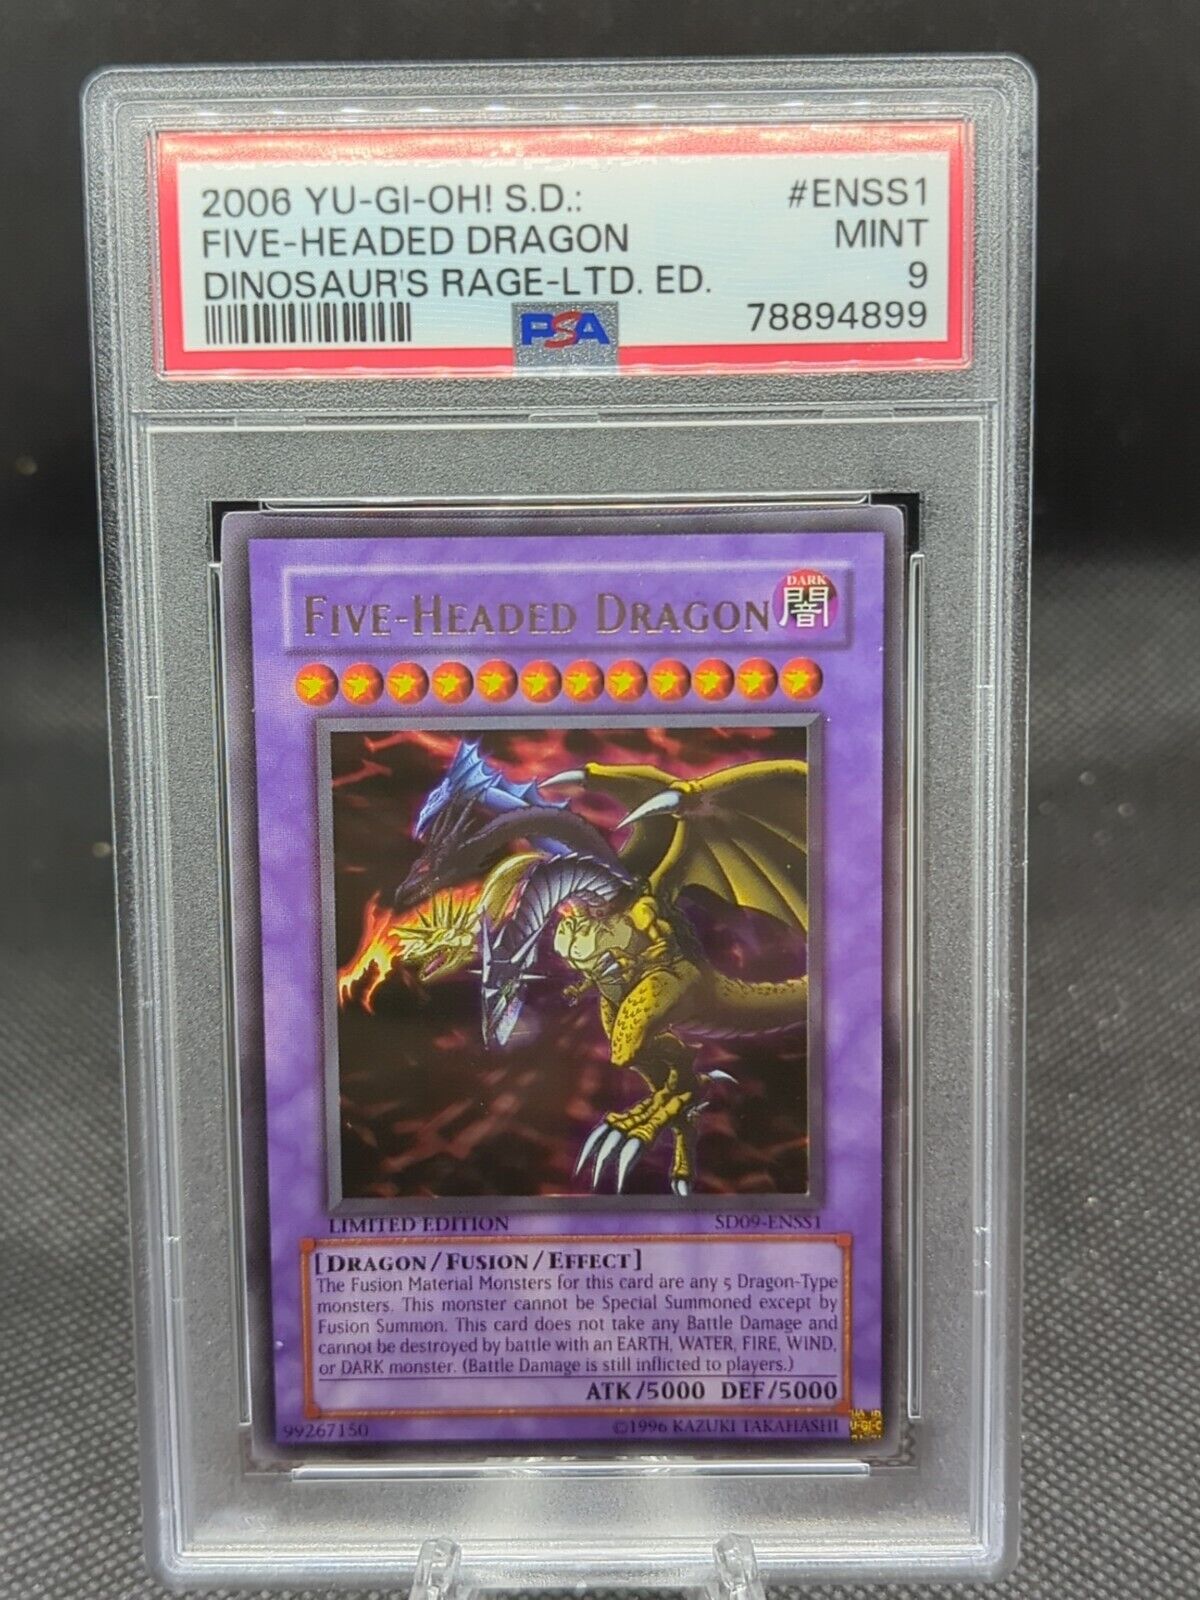 2006 Yugioh SD09-ENSS1 Five-Headed Dragon Limited Edition Ultra Rare PSA 9